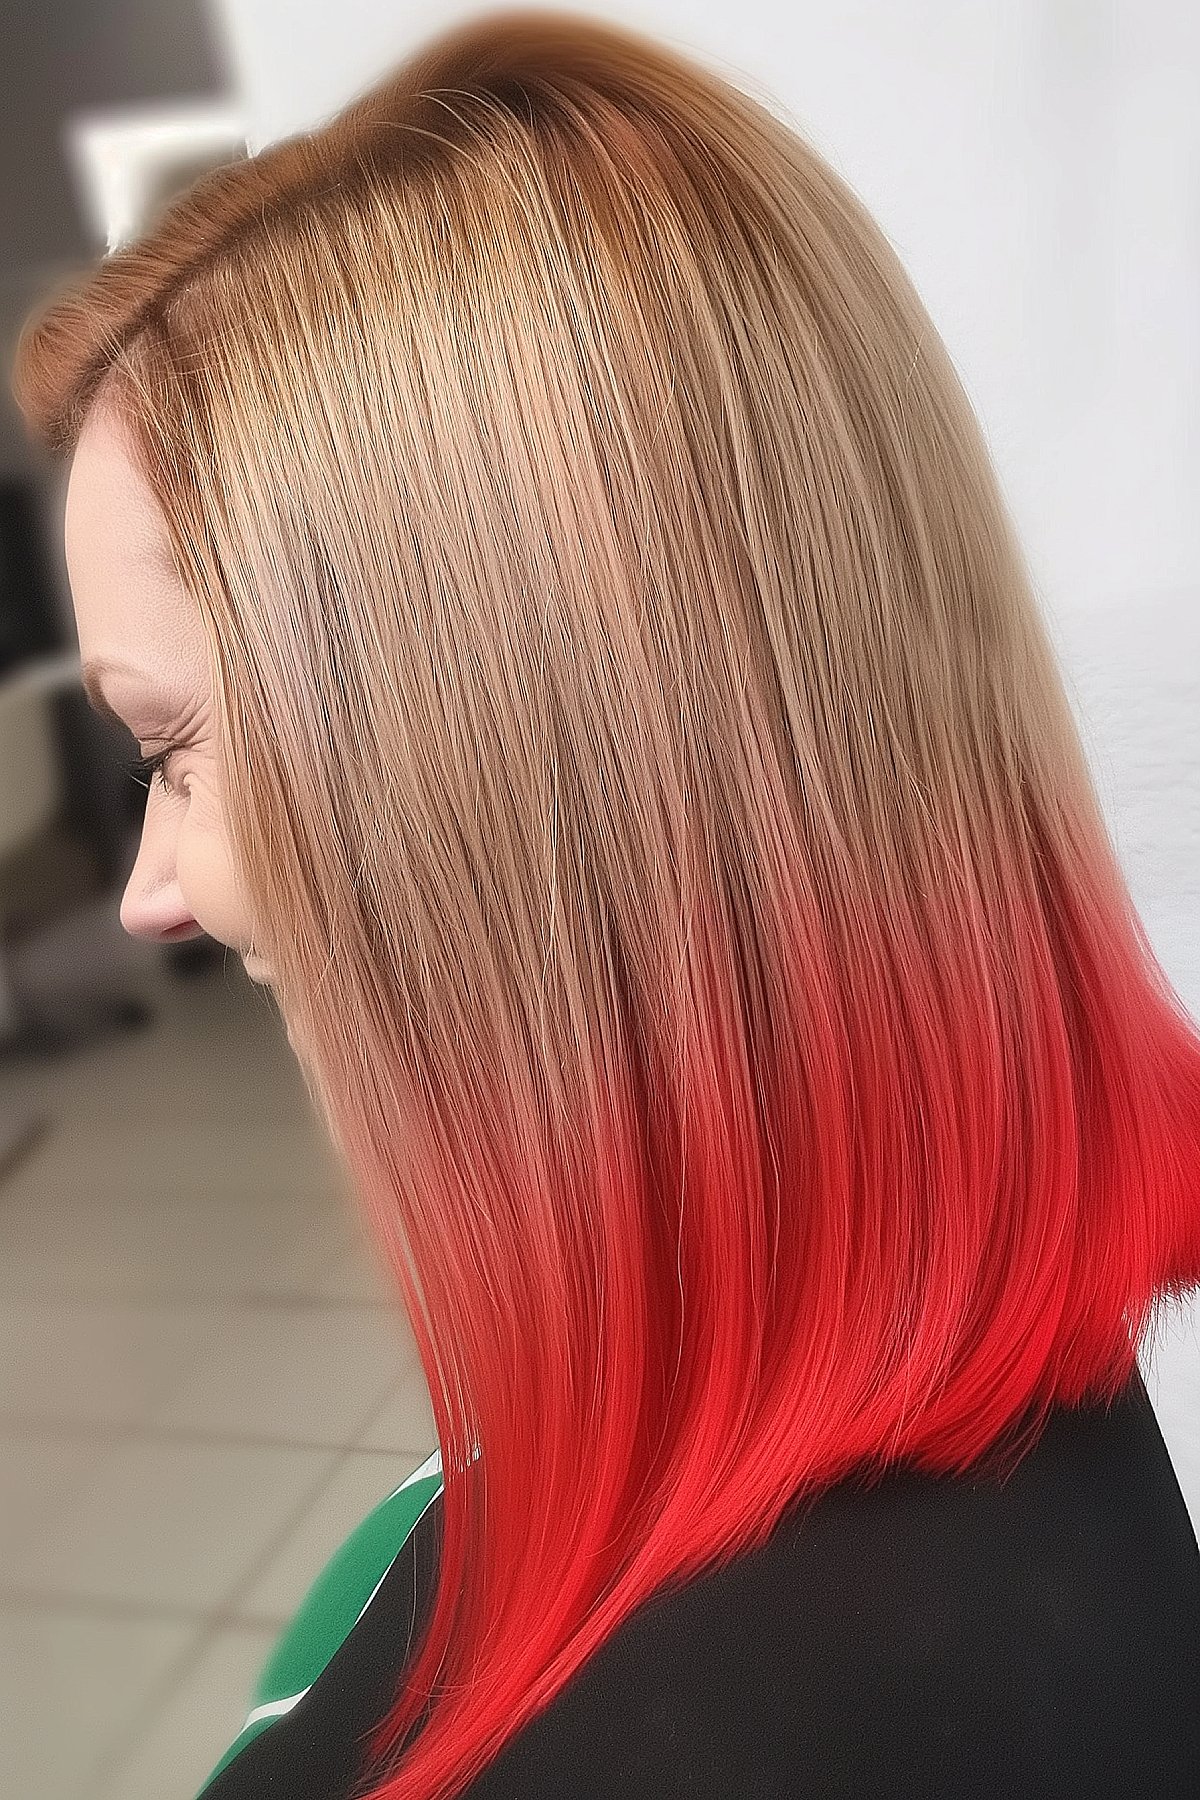 Medium-length blunt cut with reverse blonde to red ombre styling